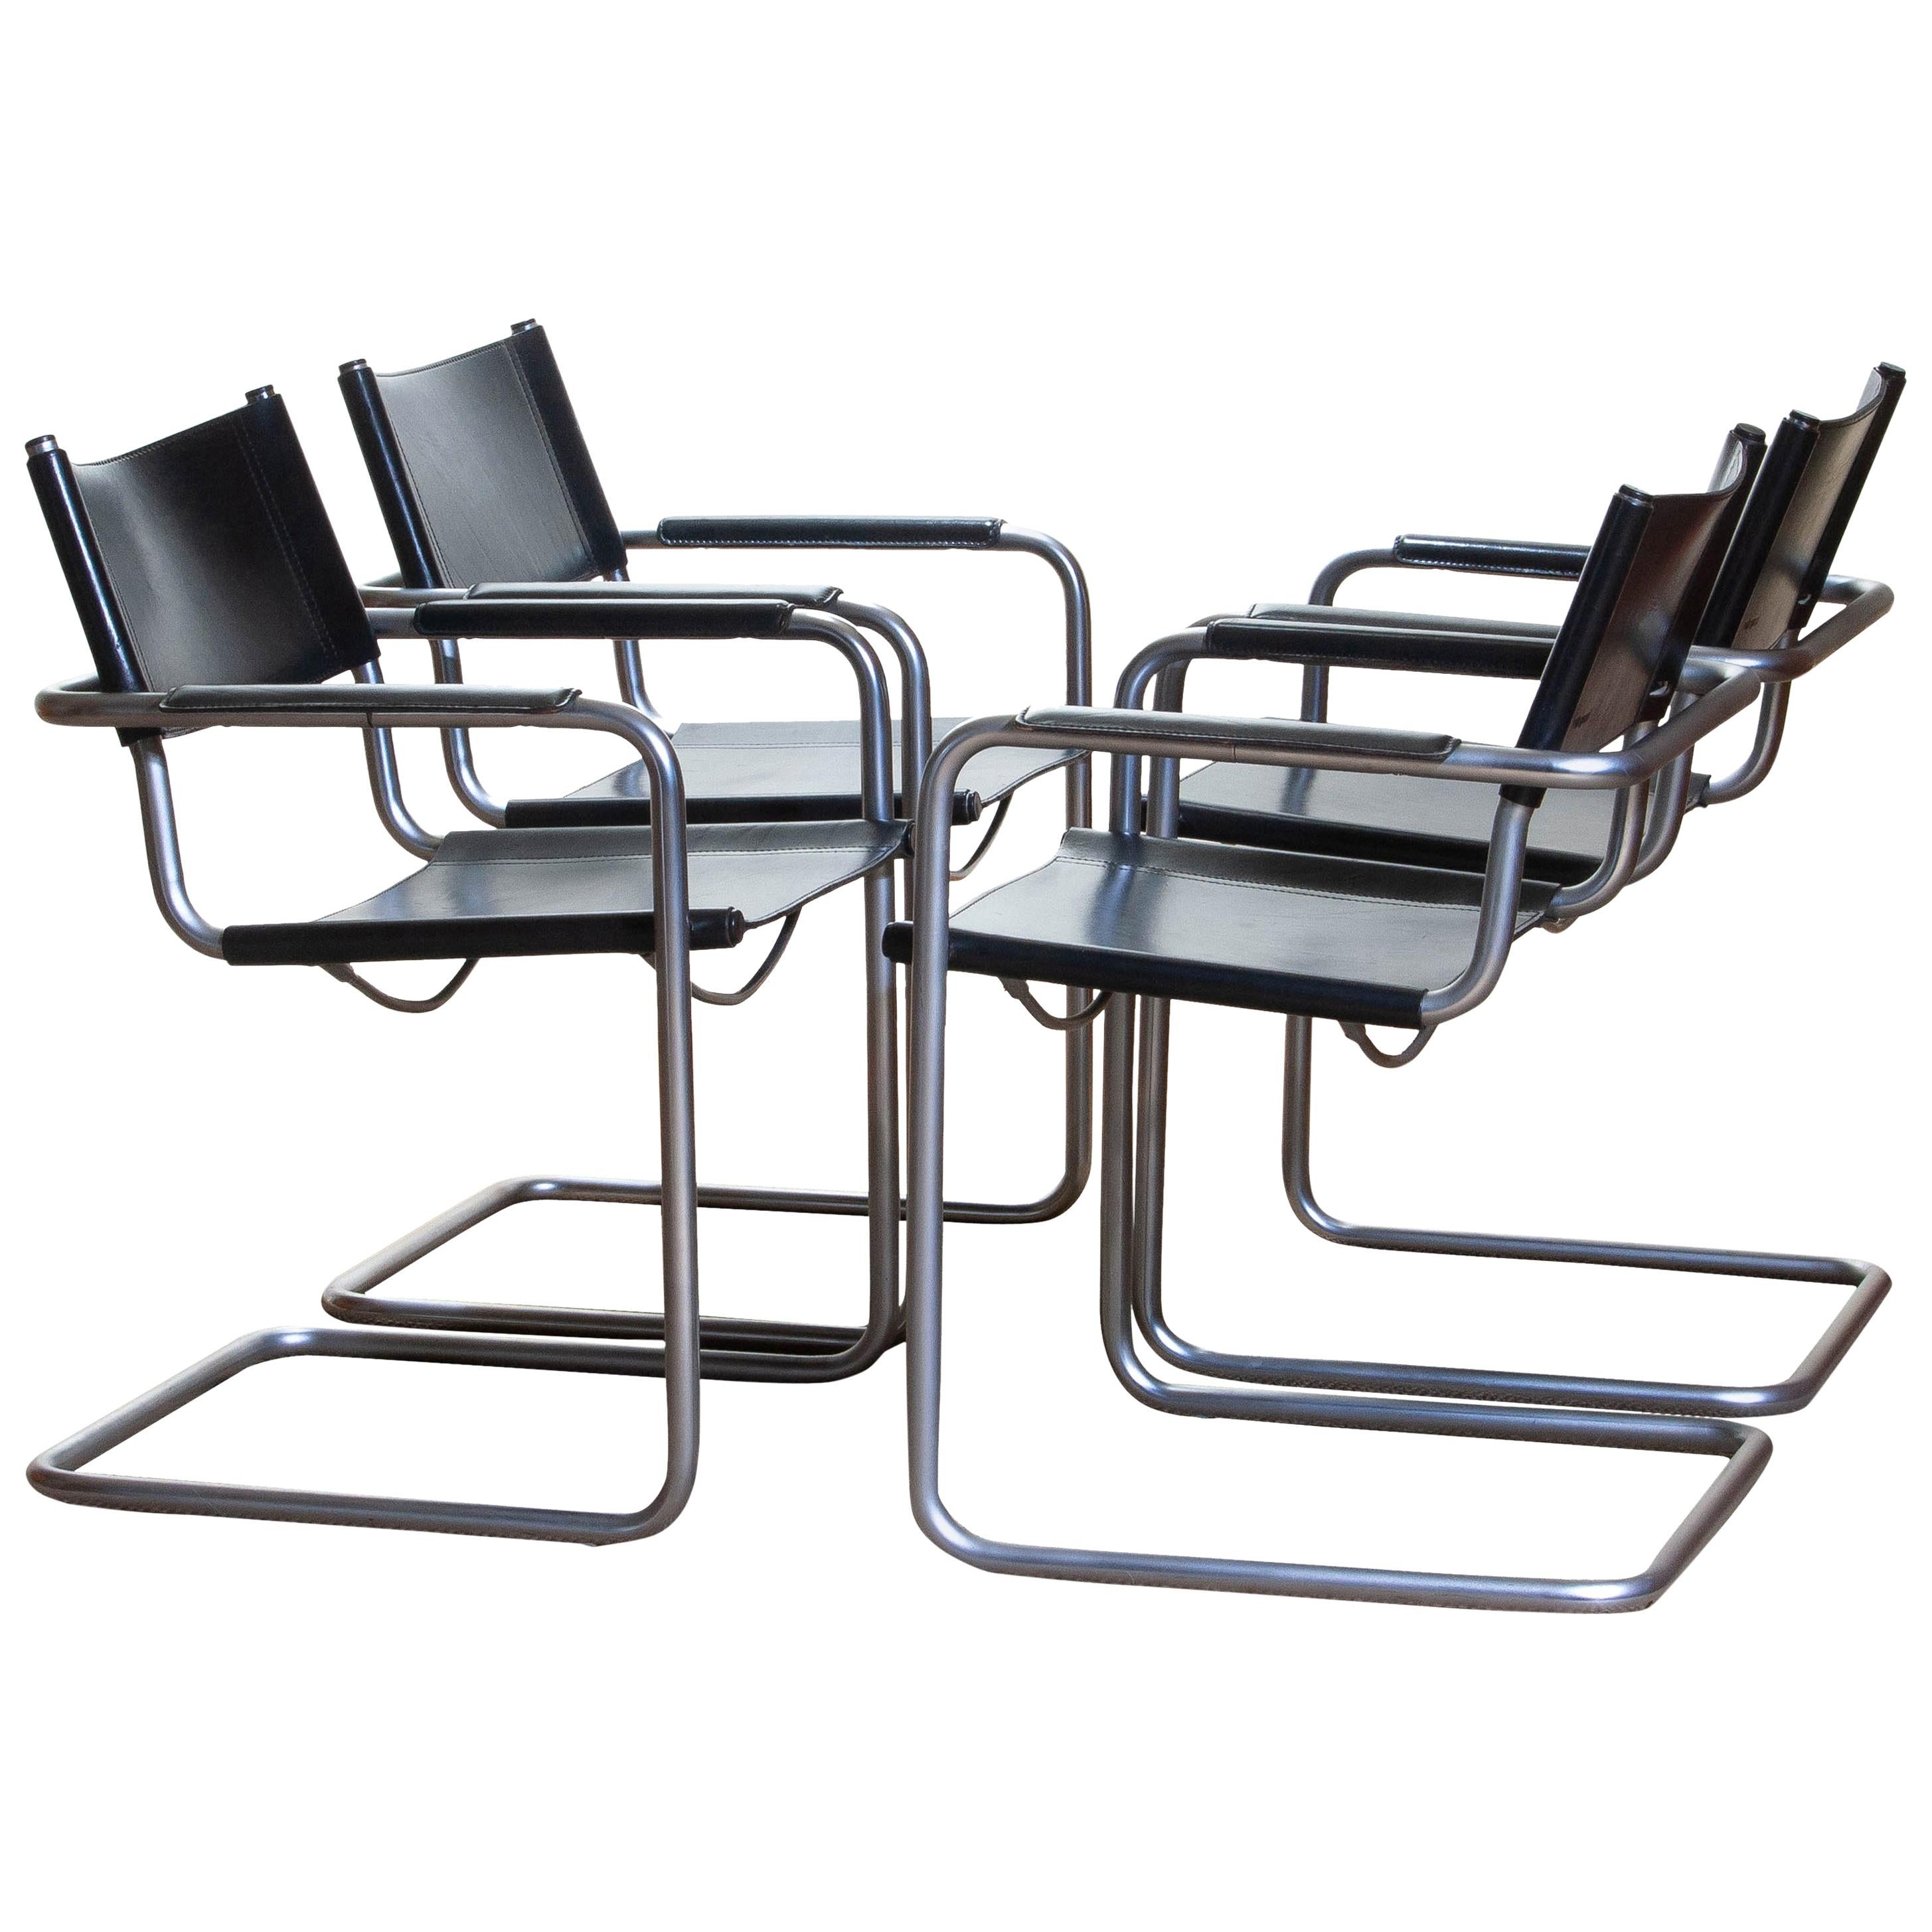 1970, perfect set of four dining or office chairs made by Matteo Grassi, Italy.
The chairs have tubular titanium look steel frames with sturdy black leather seating and backrest.
They are signed on the back of the backrest.
Overall condition is